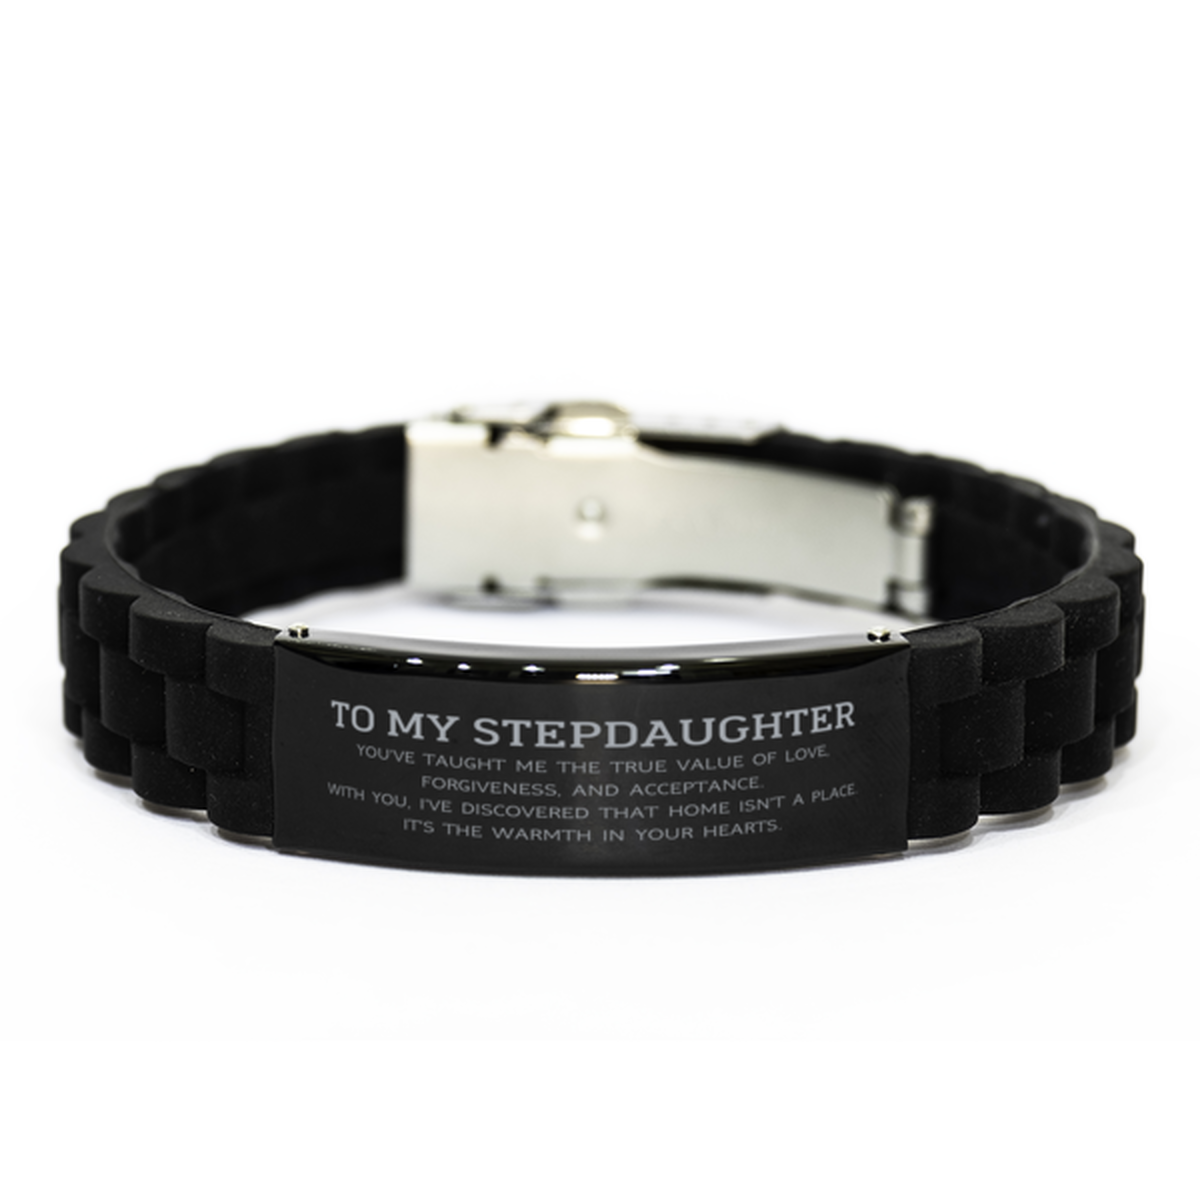 To My Stepdaughter Gifts, You've taught me the true value of love, Thank You Gifts For Stepdaughter, Birthday Black Glidelock Clasp Bracelet For Stepdaughter